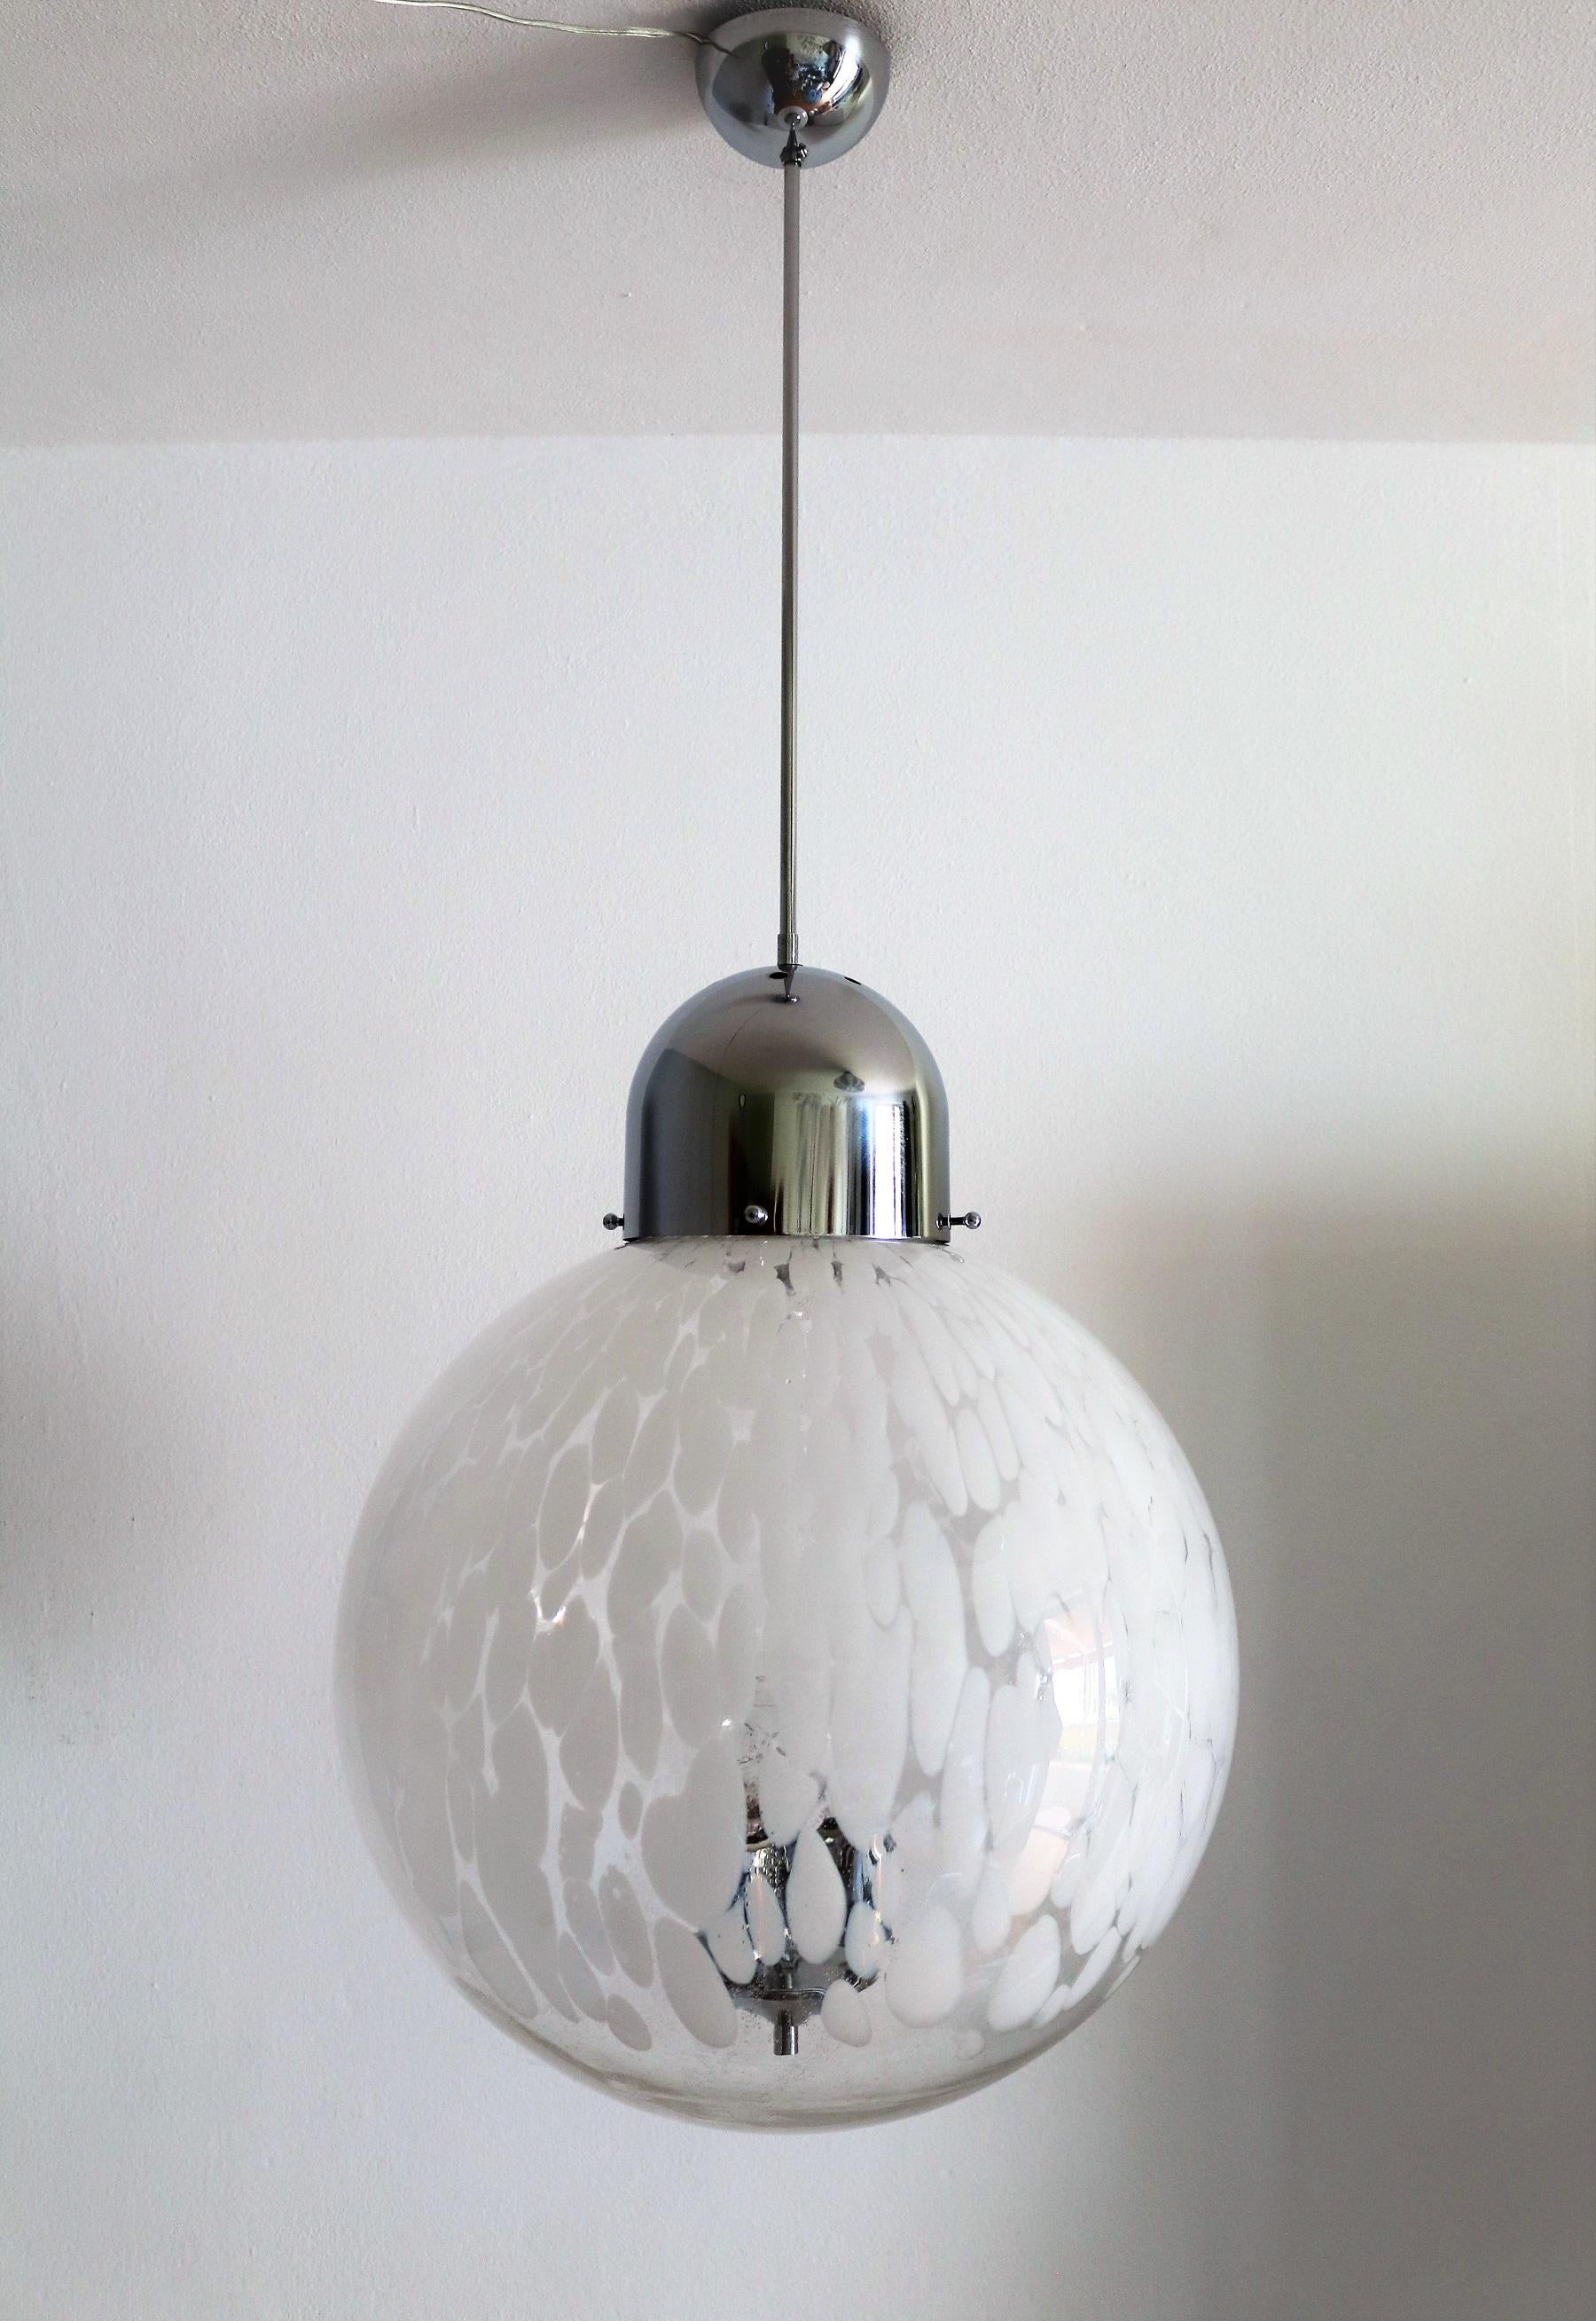 Gorgeous pendant light with big Murano glass globe in mottled glass and chromed lamp base.
The glass has a very big diameter and is in very good condition. The chrome have been polished and is shiny with small signs of age and patina.
Equipped